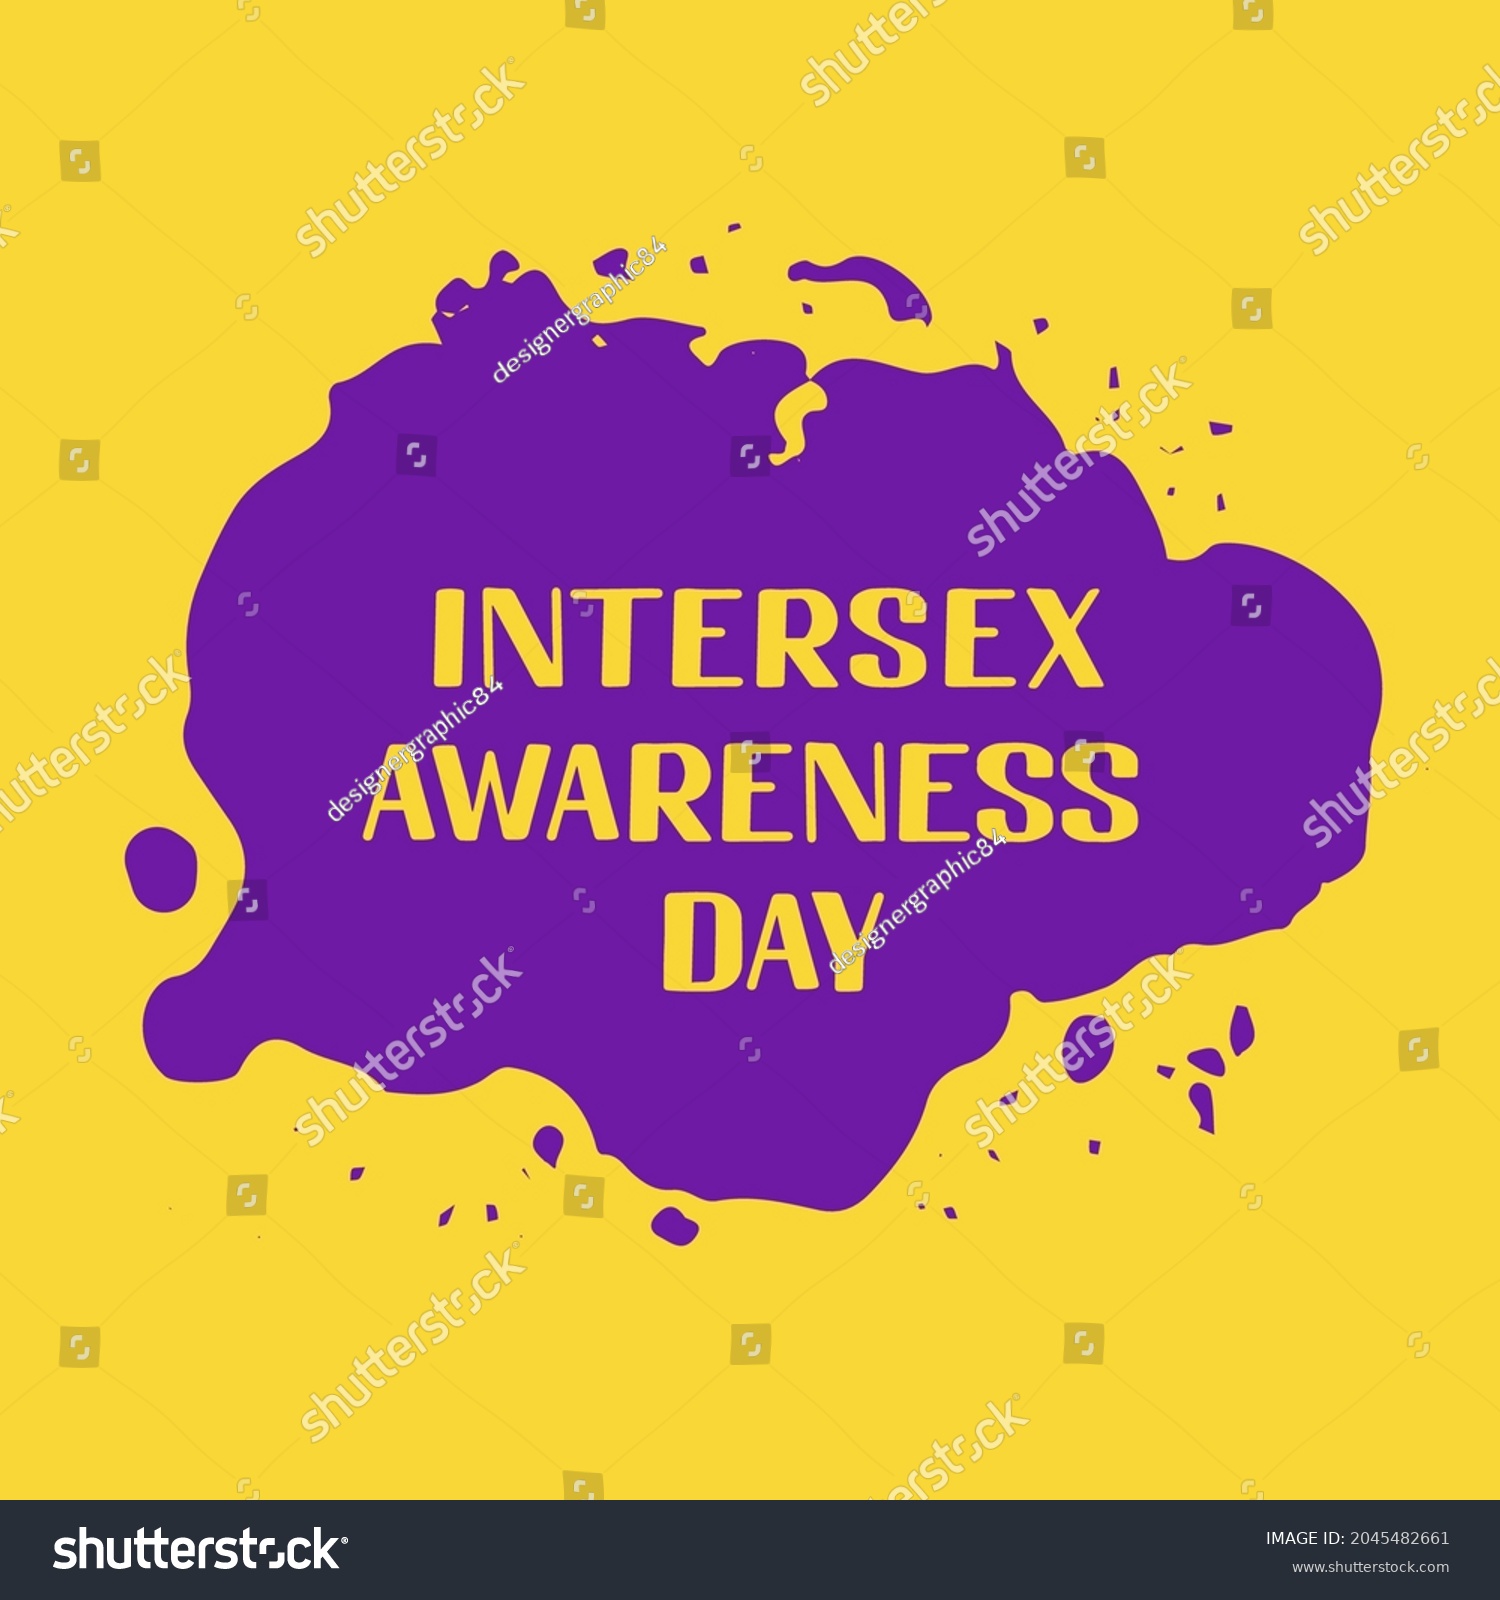 Intersex Awareness Day Typography Poster Lgbt Stock Vector Royalty Free 2045482661 Shutterstock 